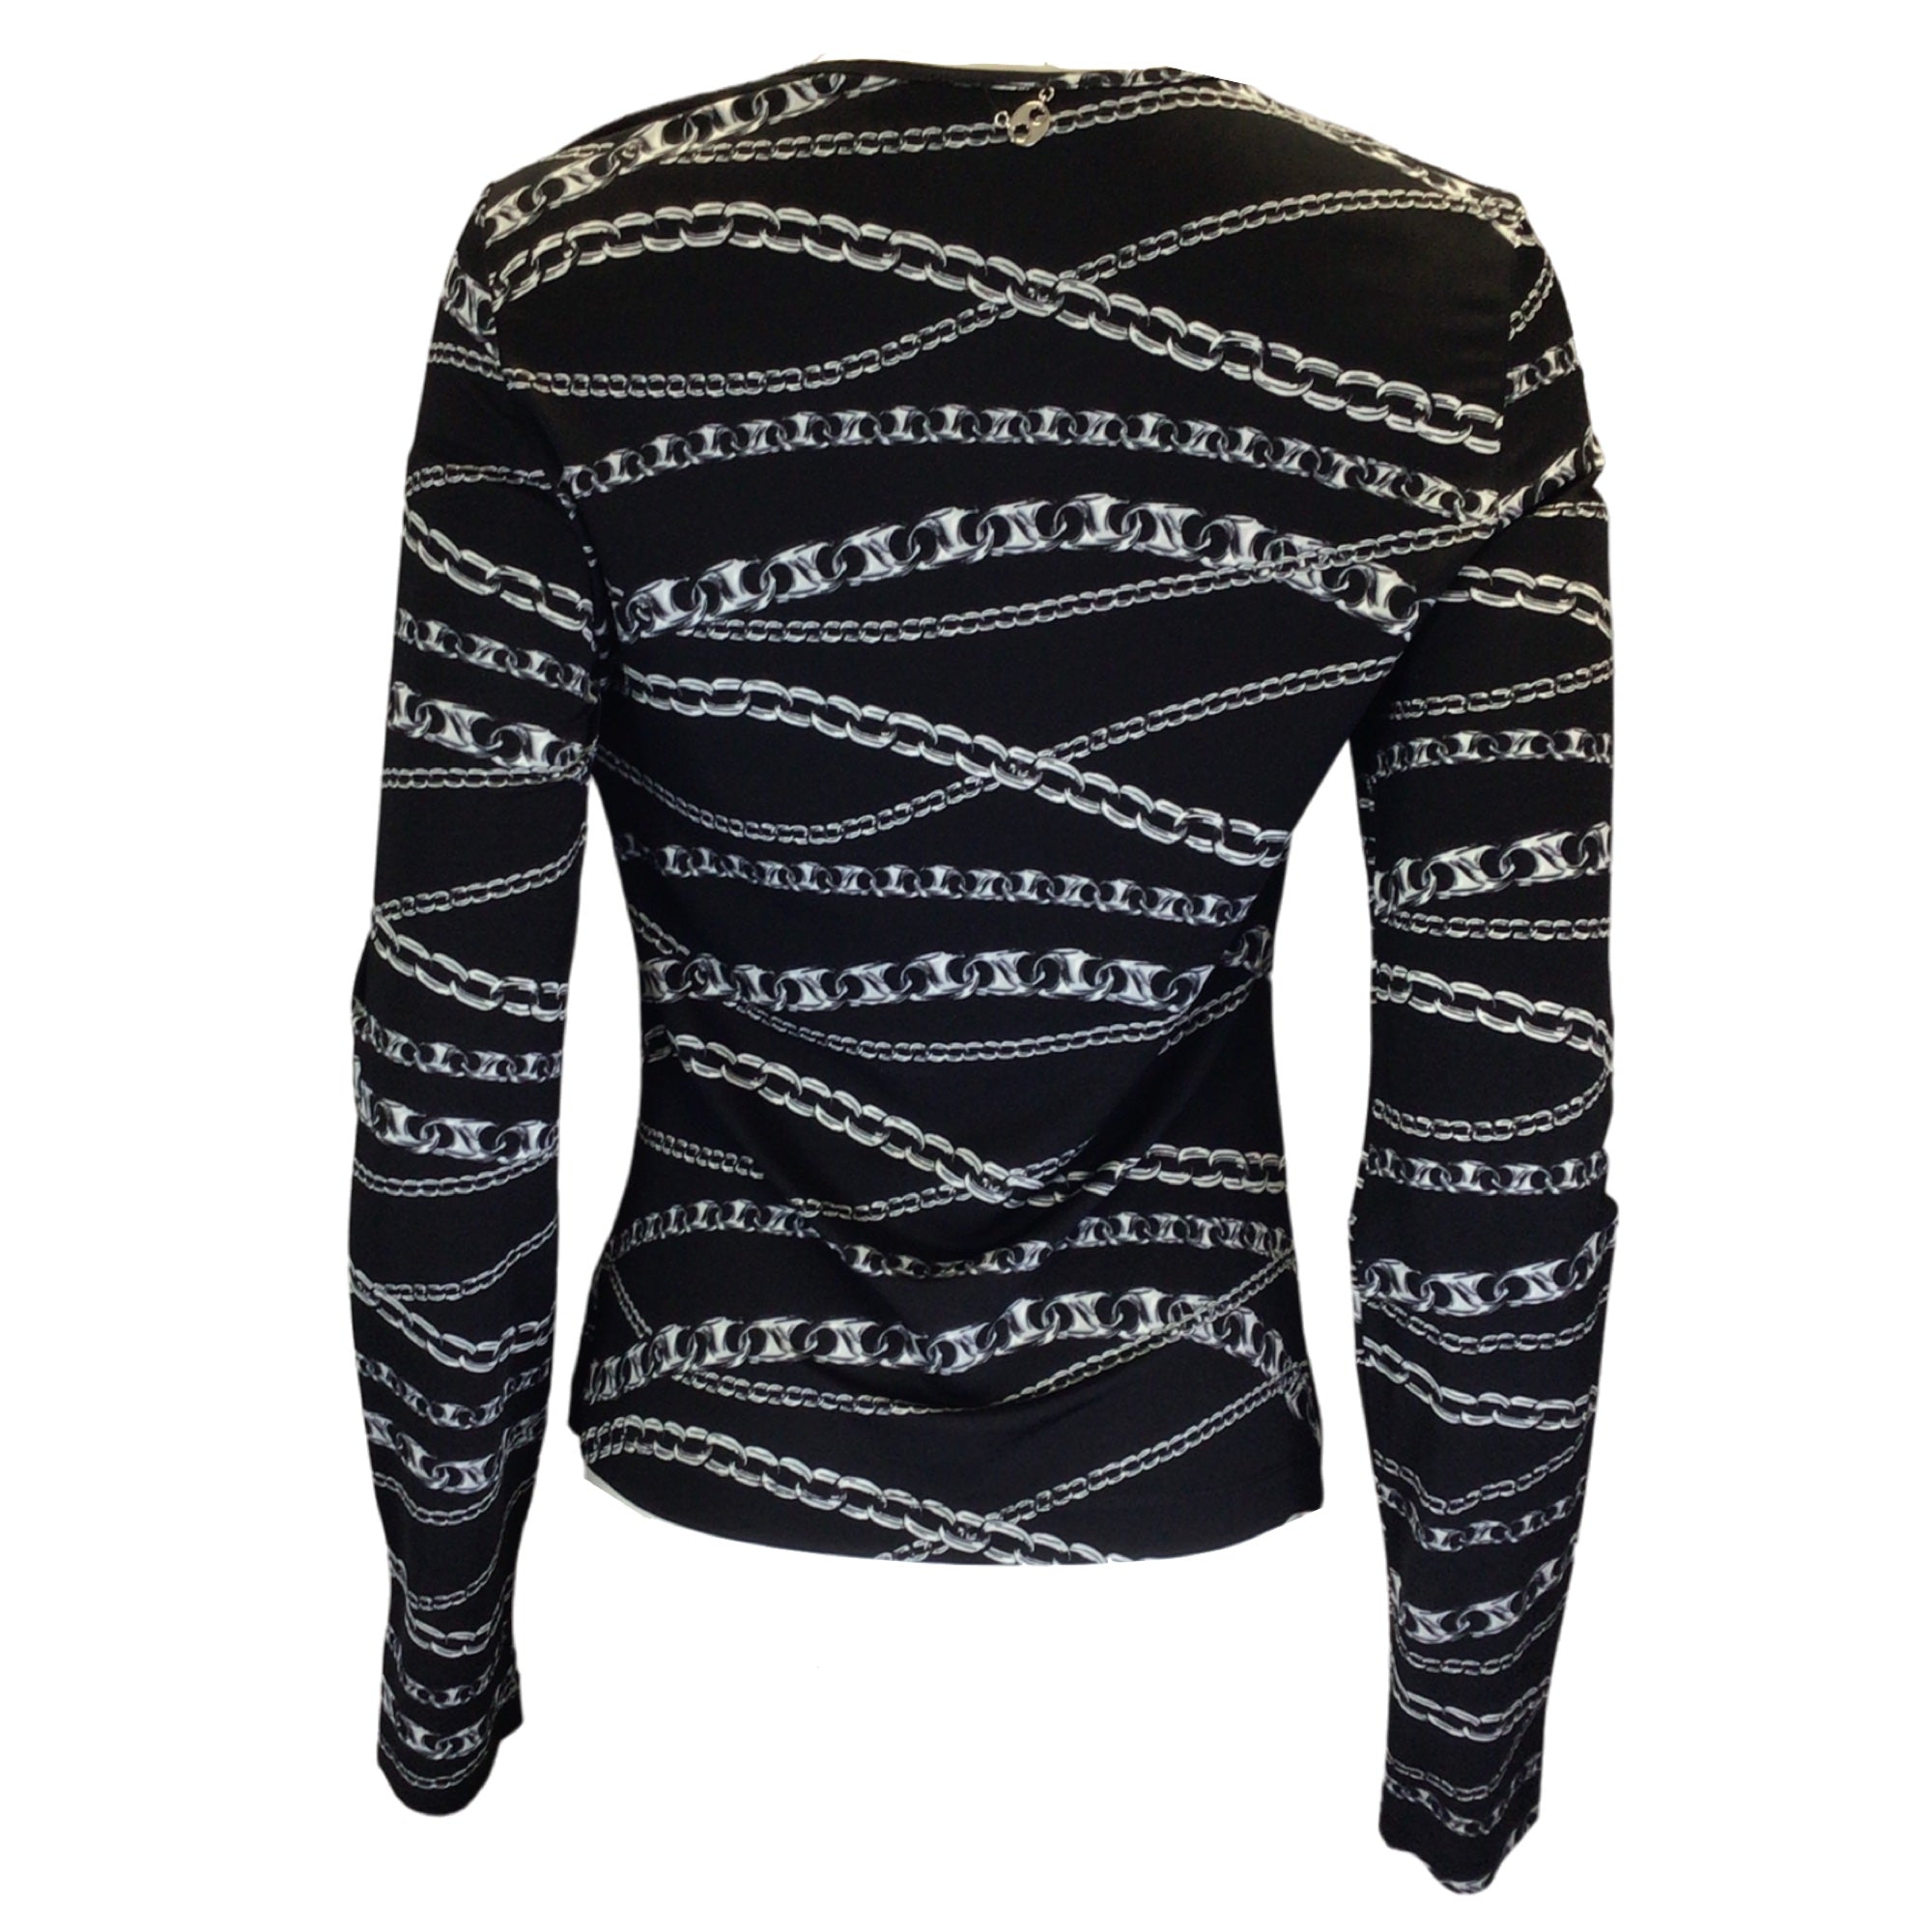 Paco Rabanne Black / Silver Chain Print Long Sleeved Stretch Jersey Top